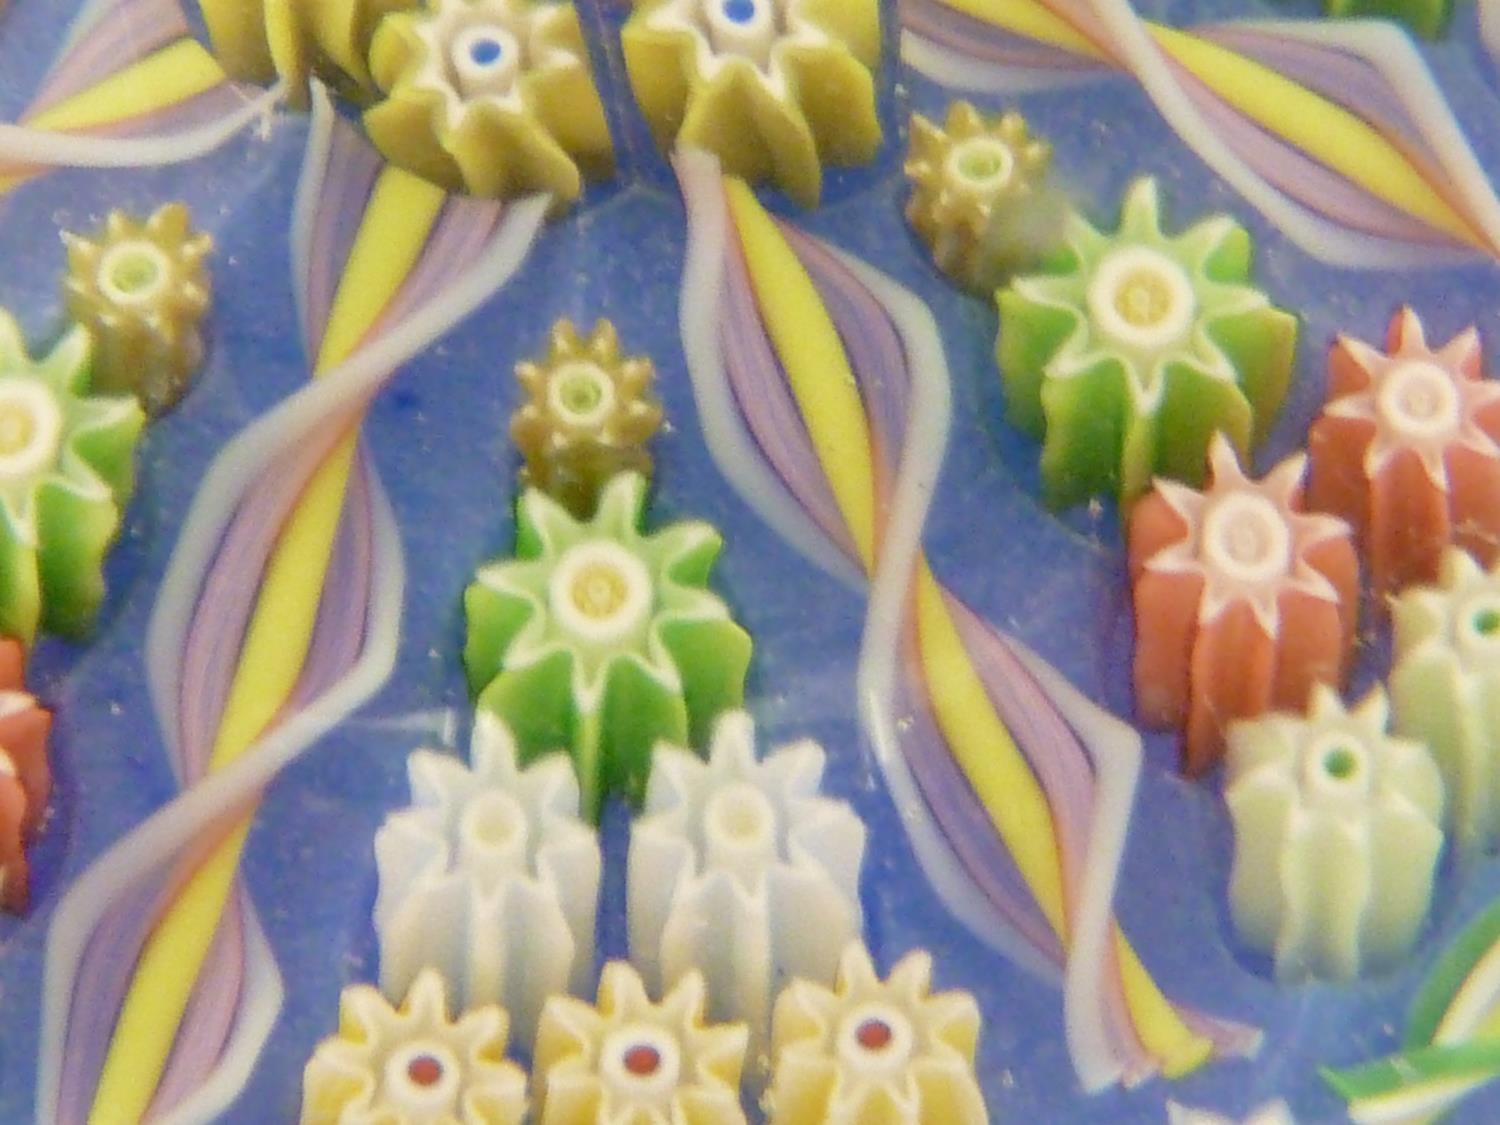 Perthshire - a glass paperweight, concentric millifiore canes intersperced with candy twist canes, - Image 2 of 4